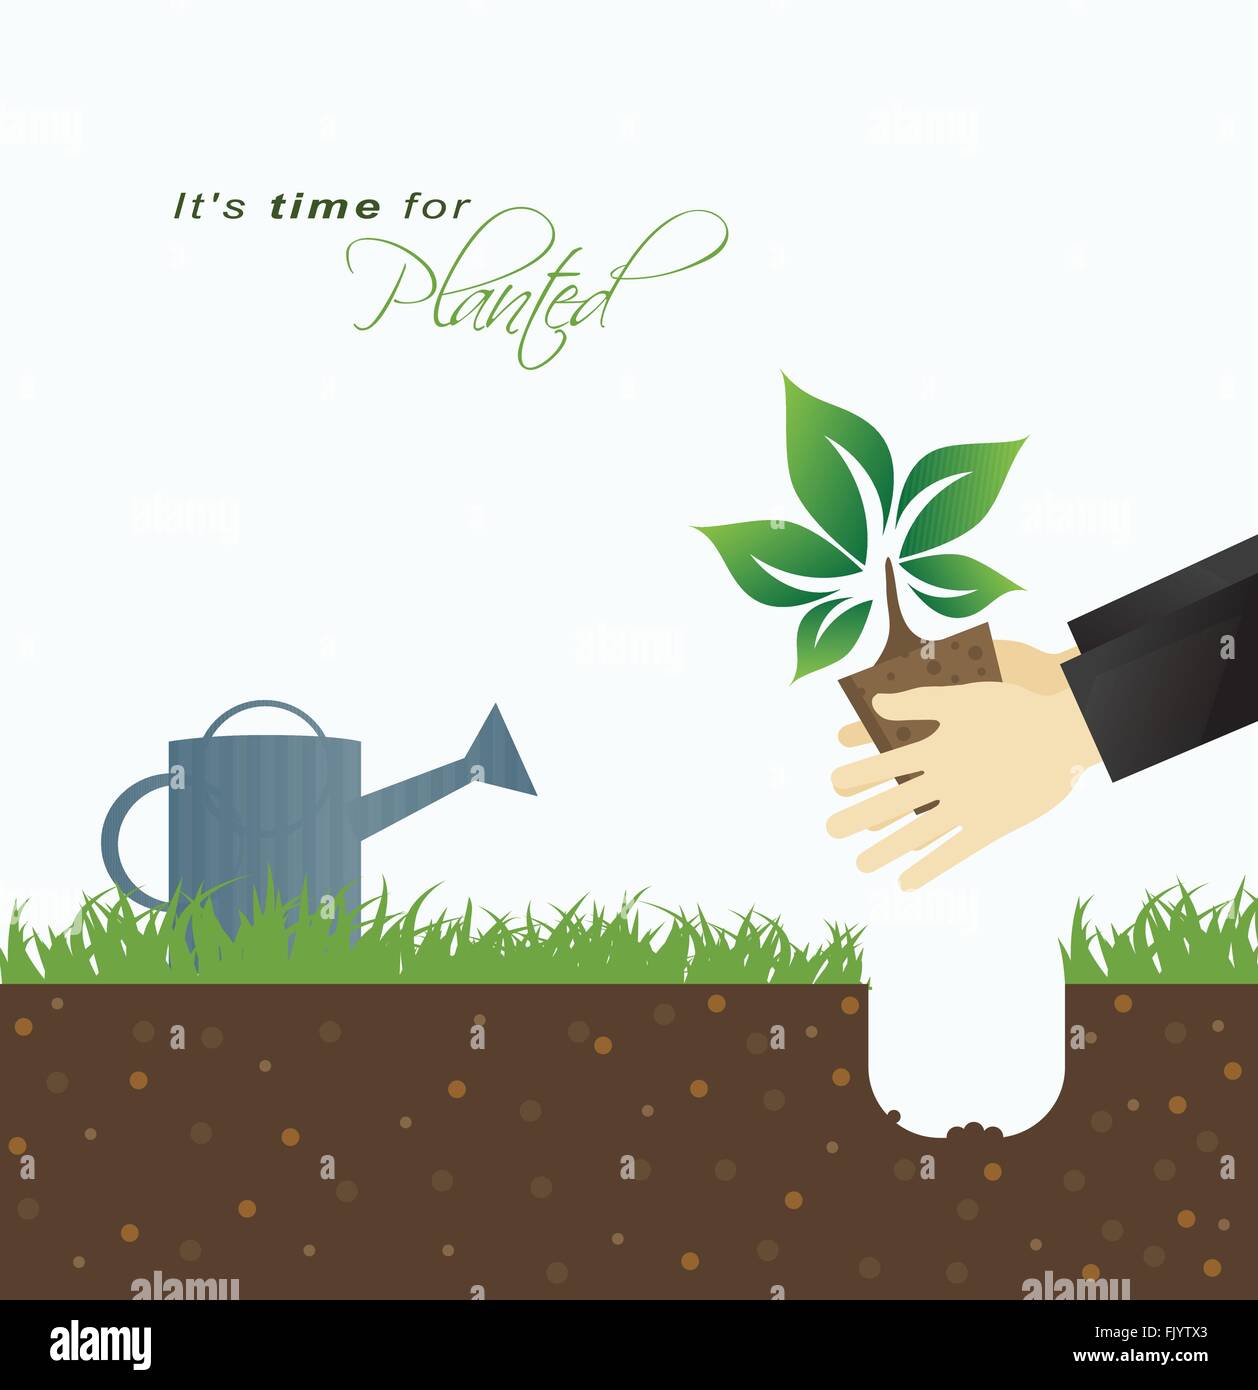 It is time for planting.Farmer planting in the ground with green grass and watering can in background Stock Vector